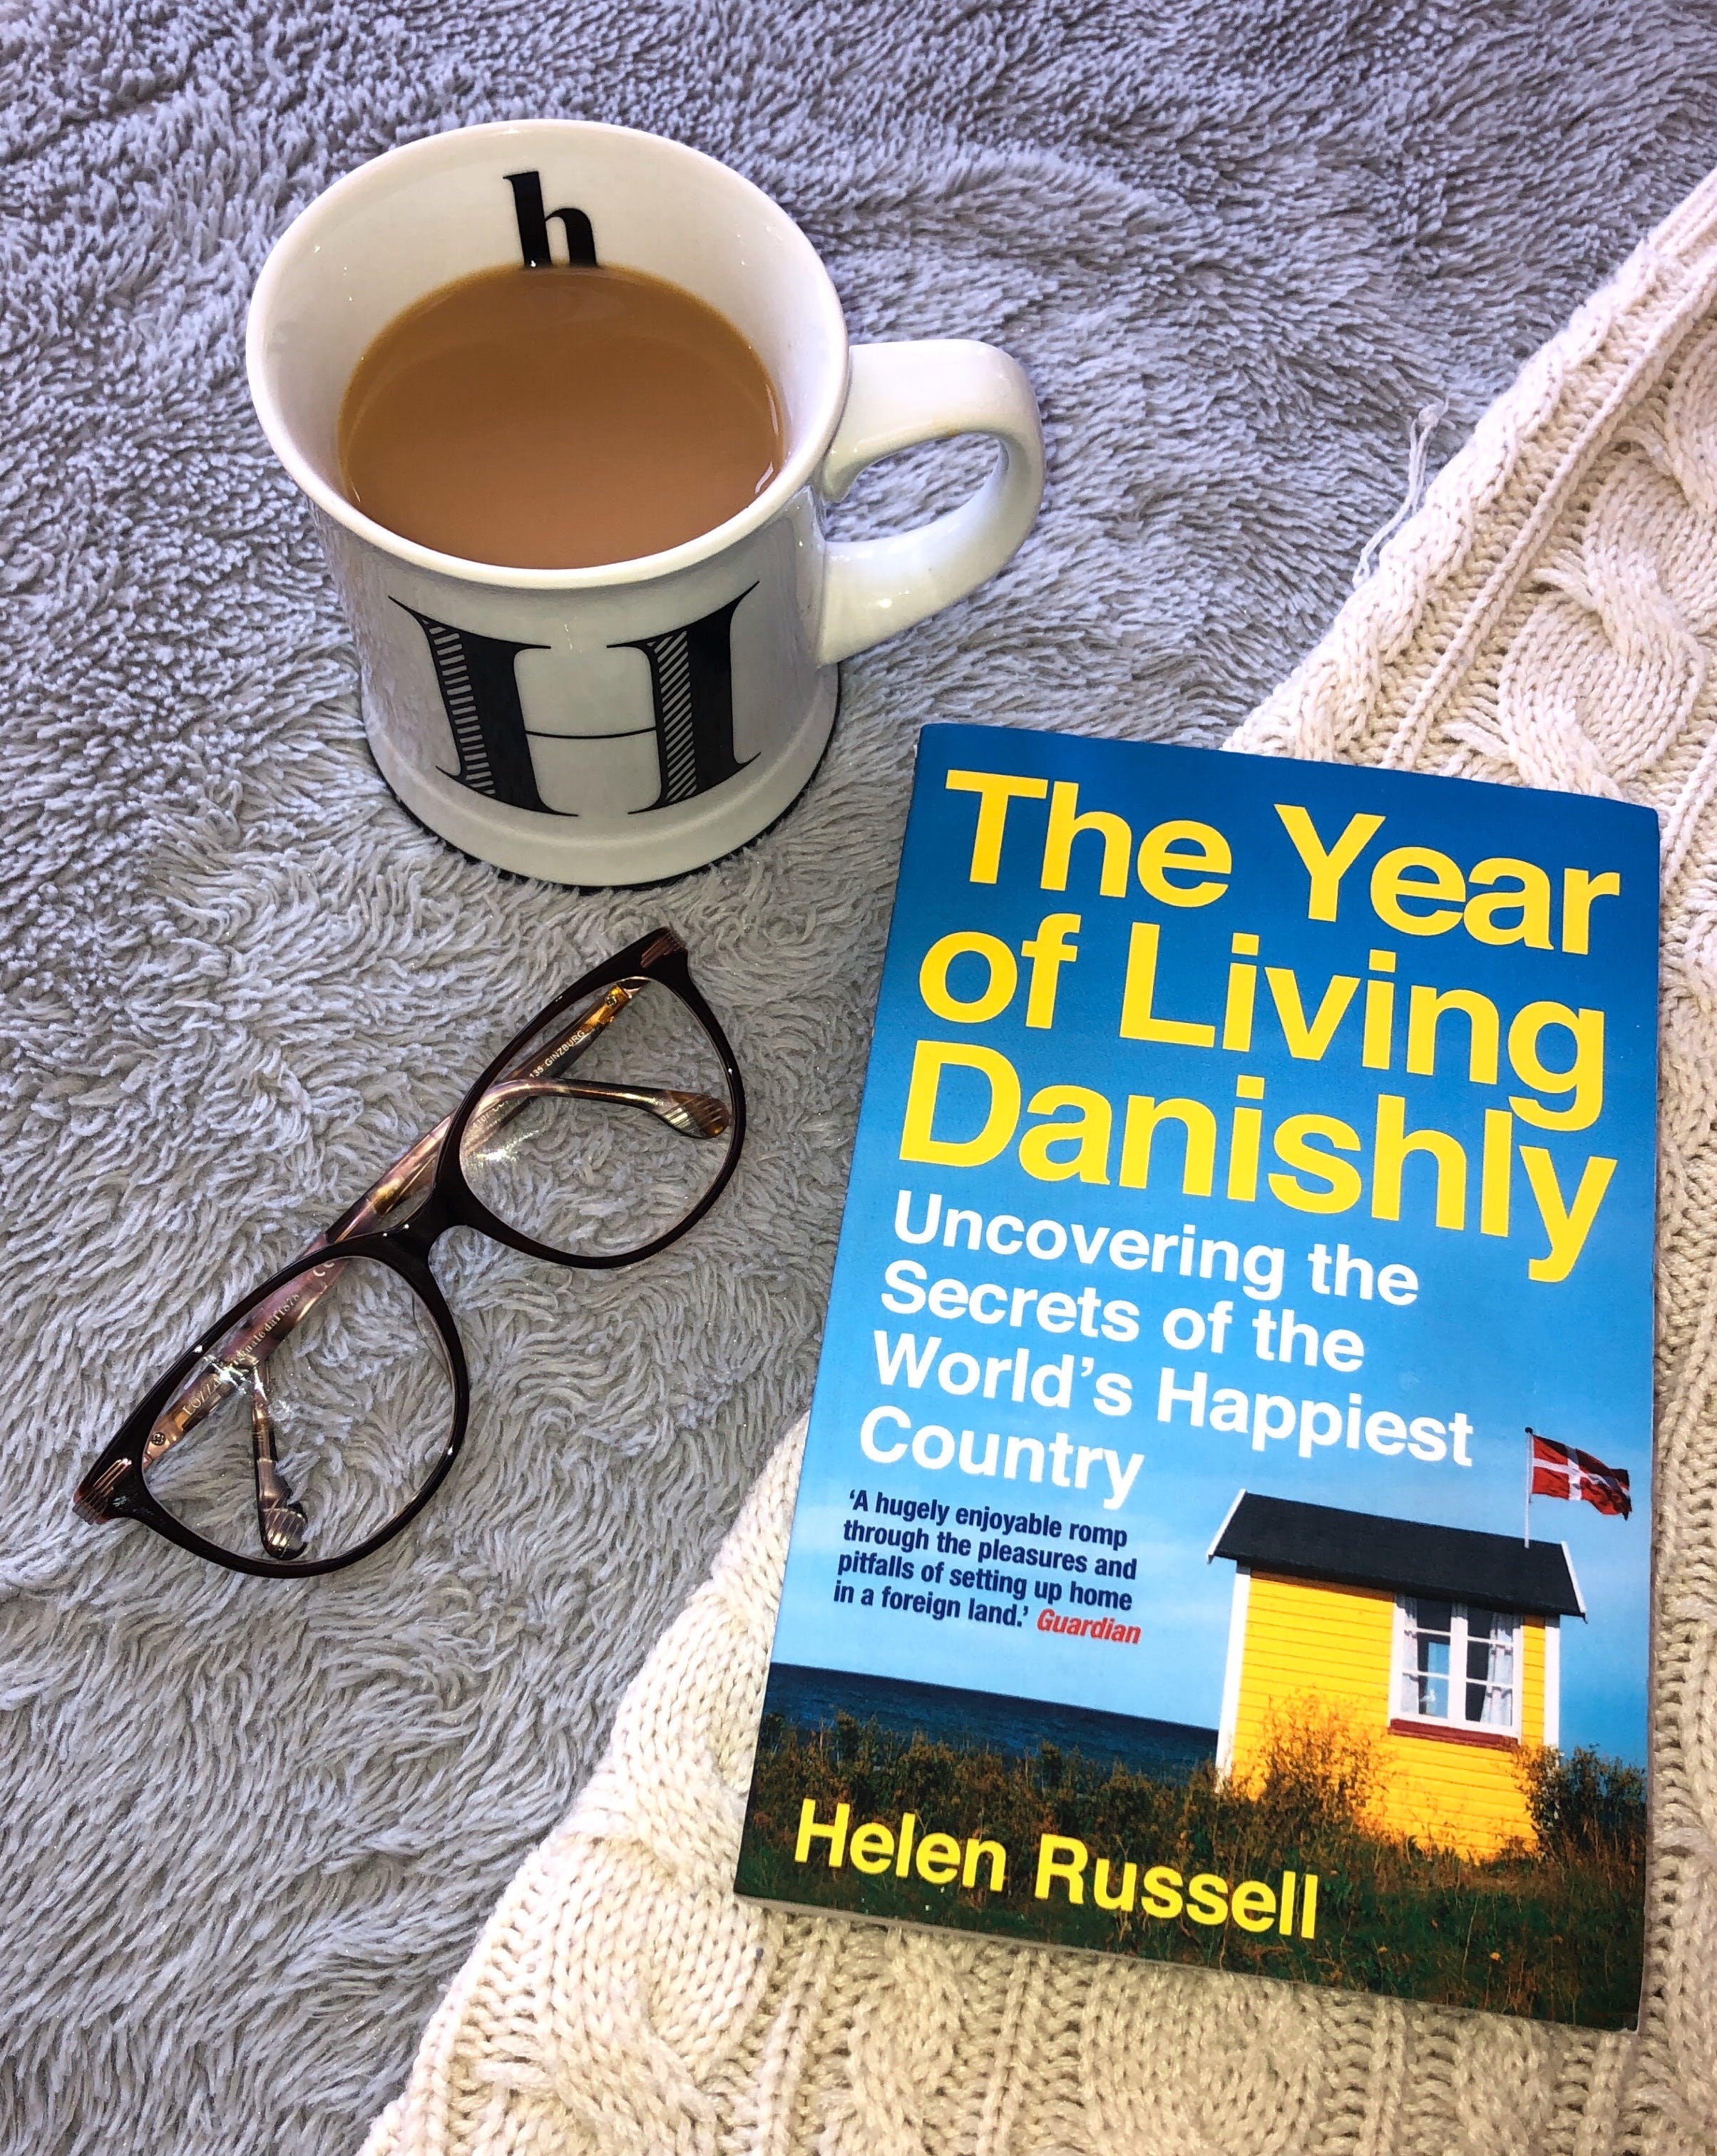 A book titled 'The Year Of Living Danishly', next to a pair of glasses and a cup of tea